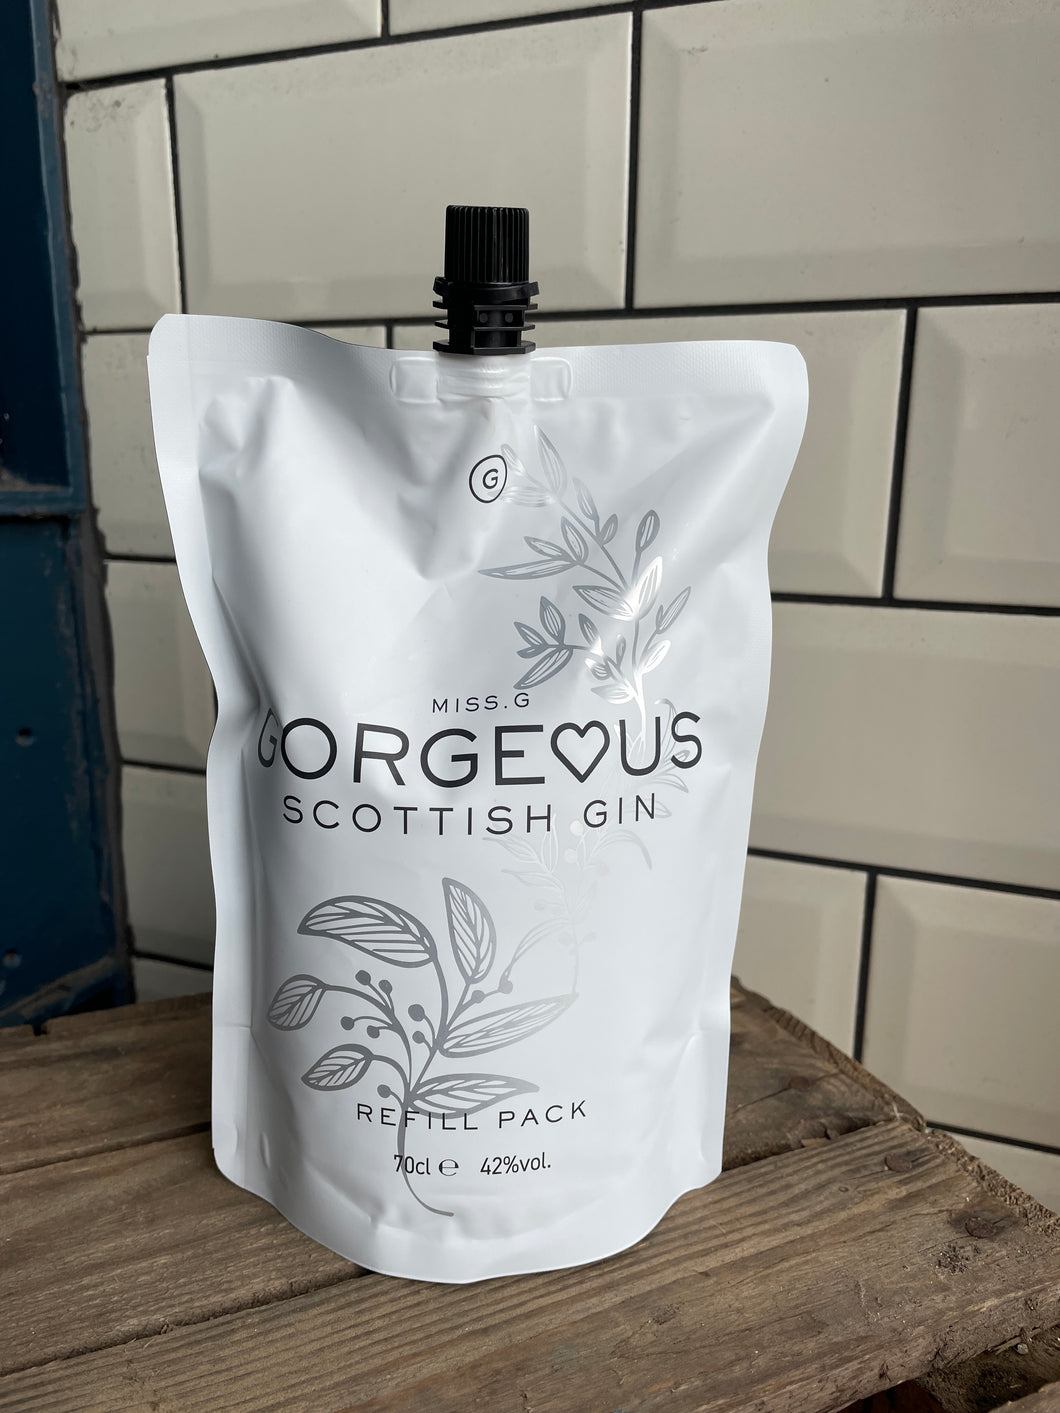 Miss G Gorgeous Scottish Gin Refill Pack, 42% ABV, 70cl